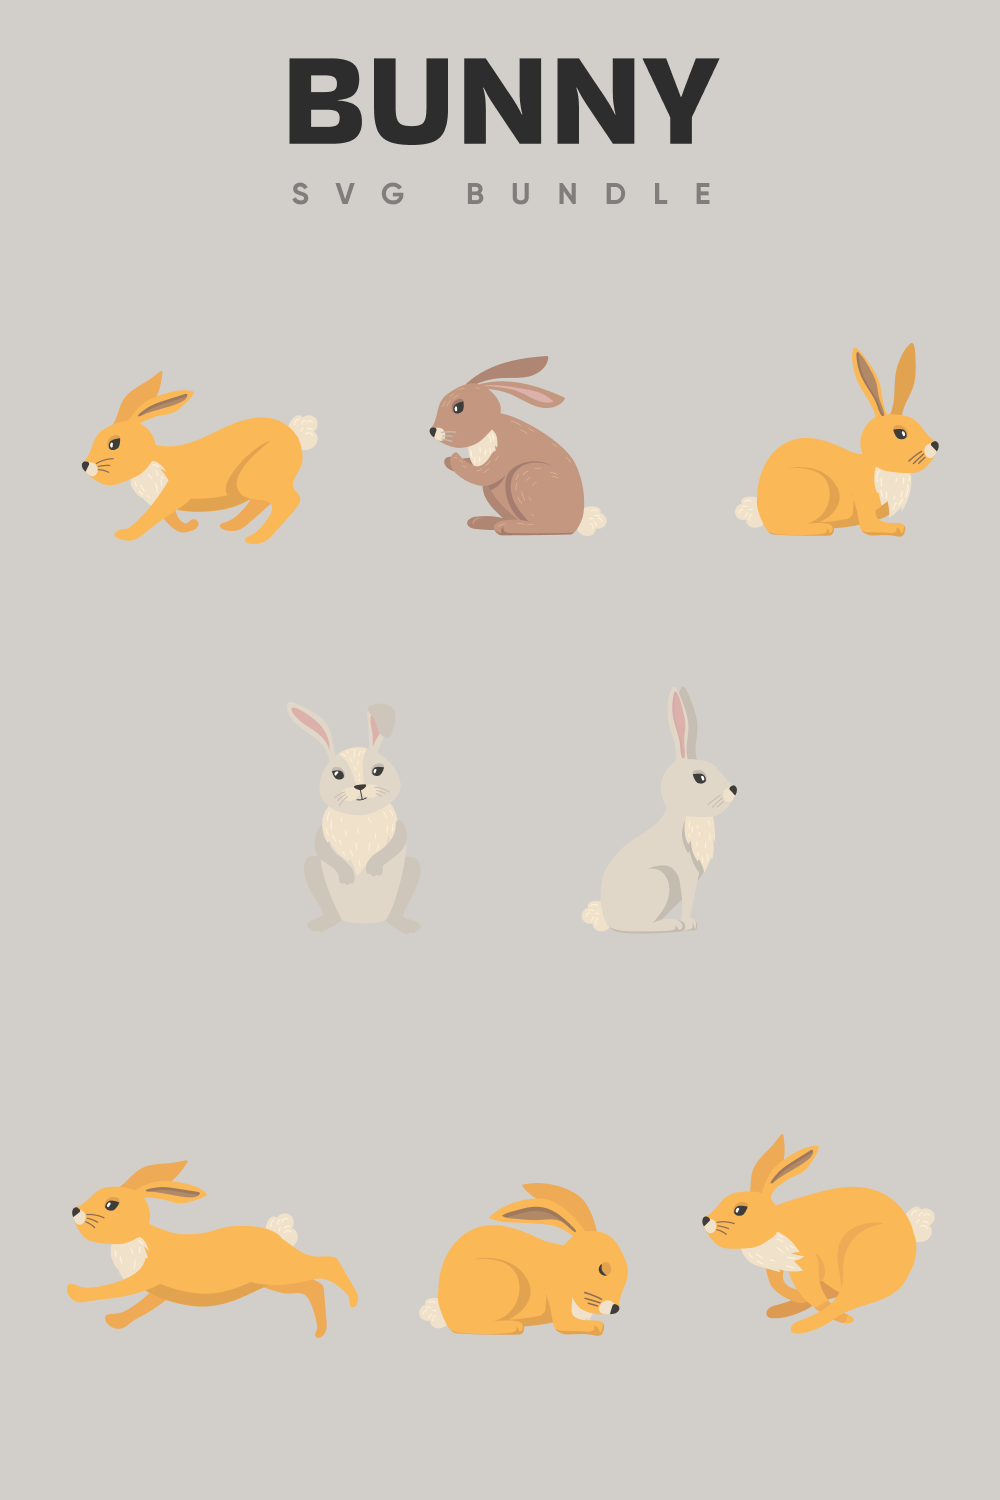 Collage of images of a gray and red rabbit.